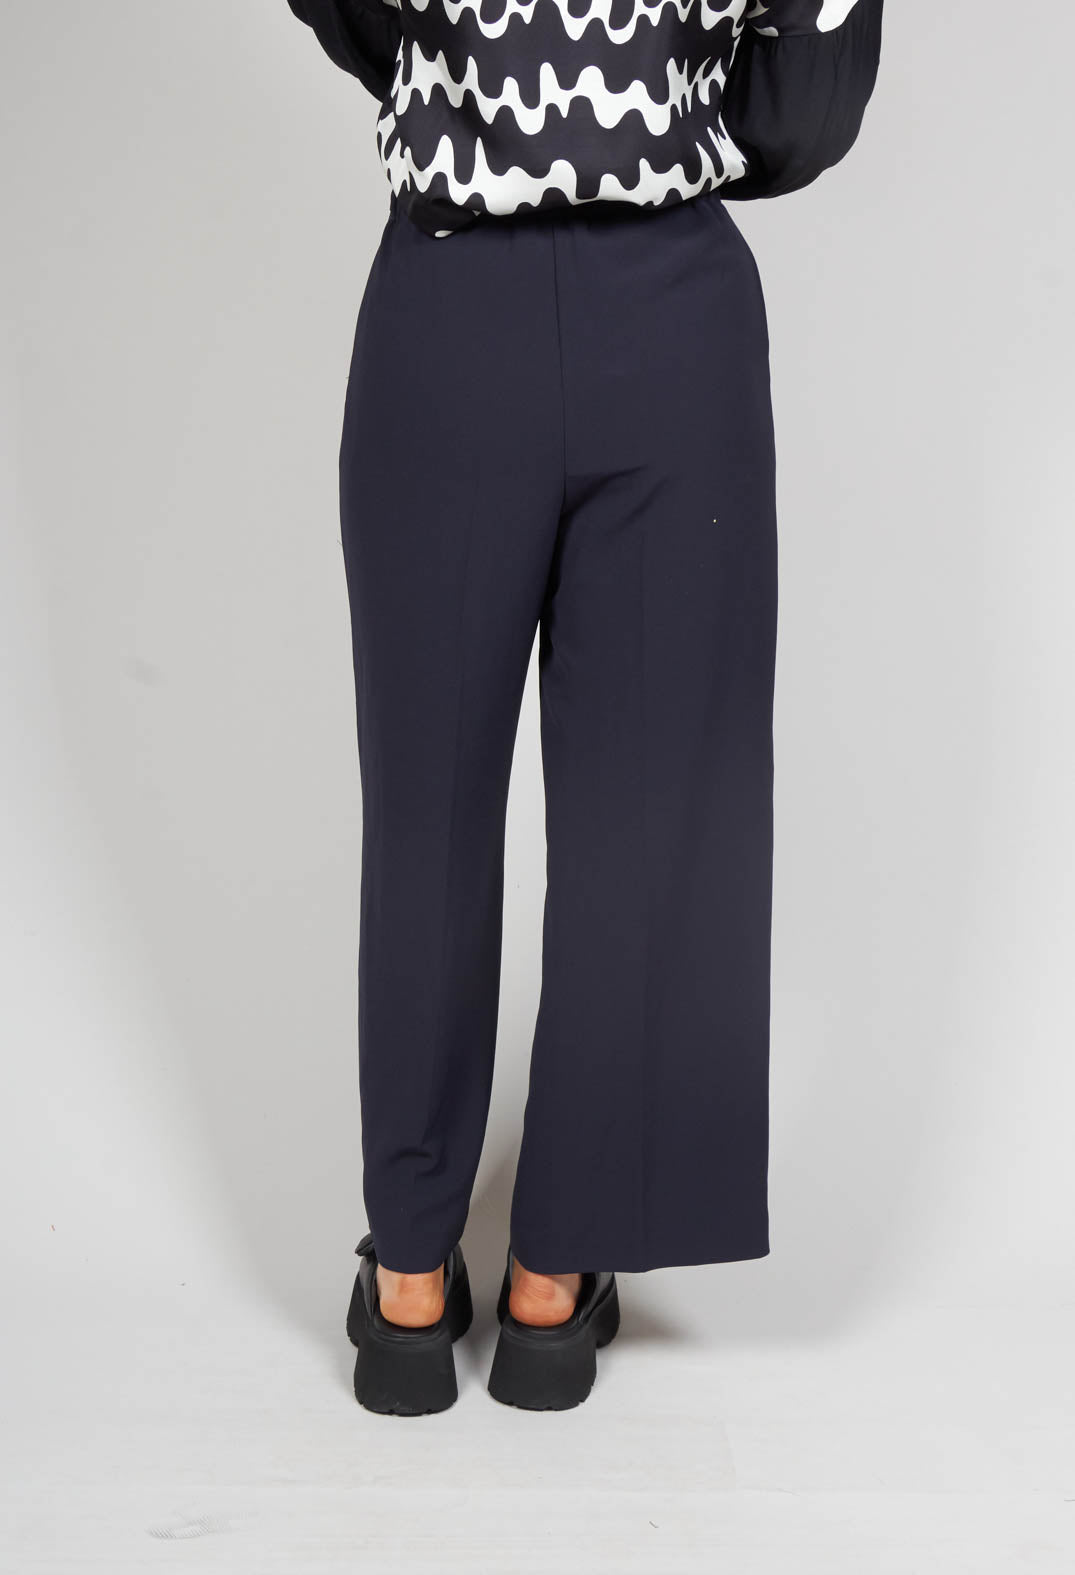 Beatrice B navy high waisted tailored trousers